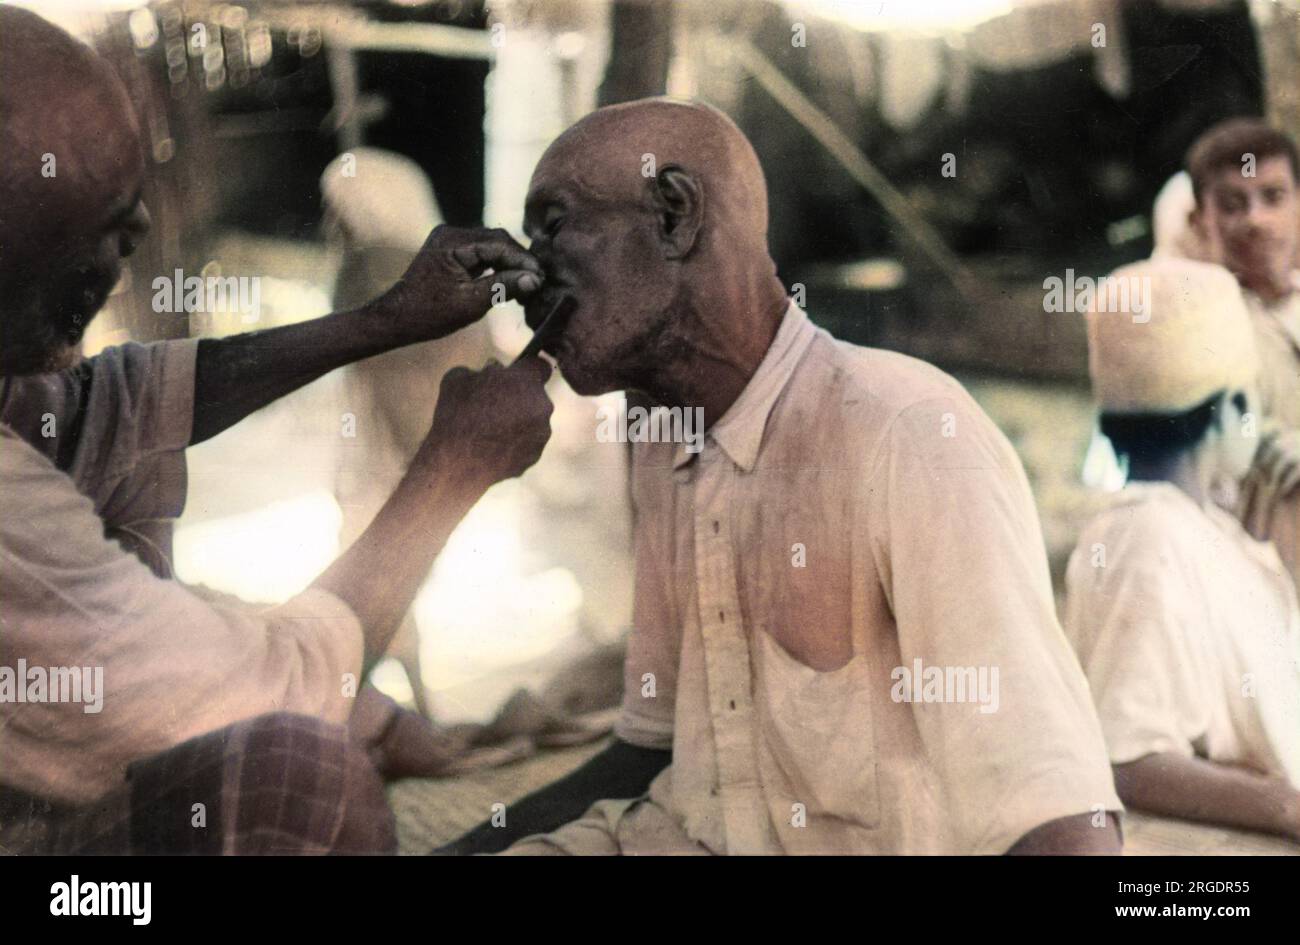 A close shave with a cut- throat razor for this man in the United Arab Emirates, who is having his moustache shaved off - ouch! Stock Photo